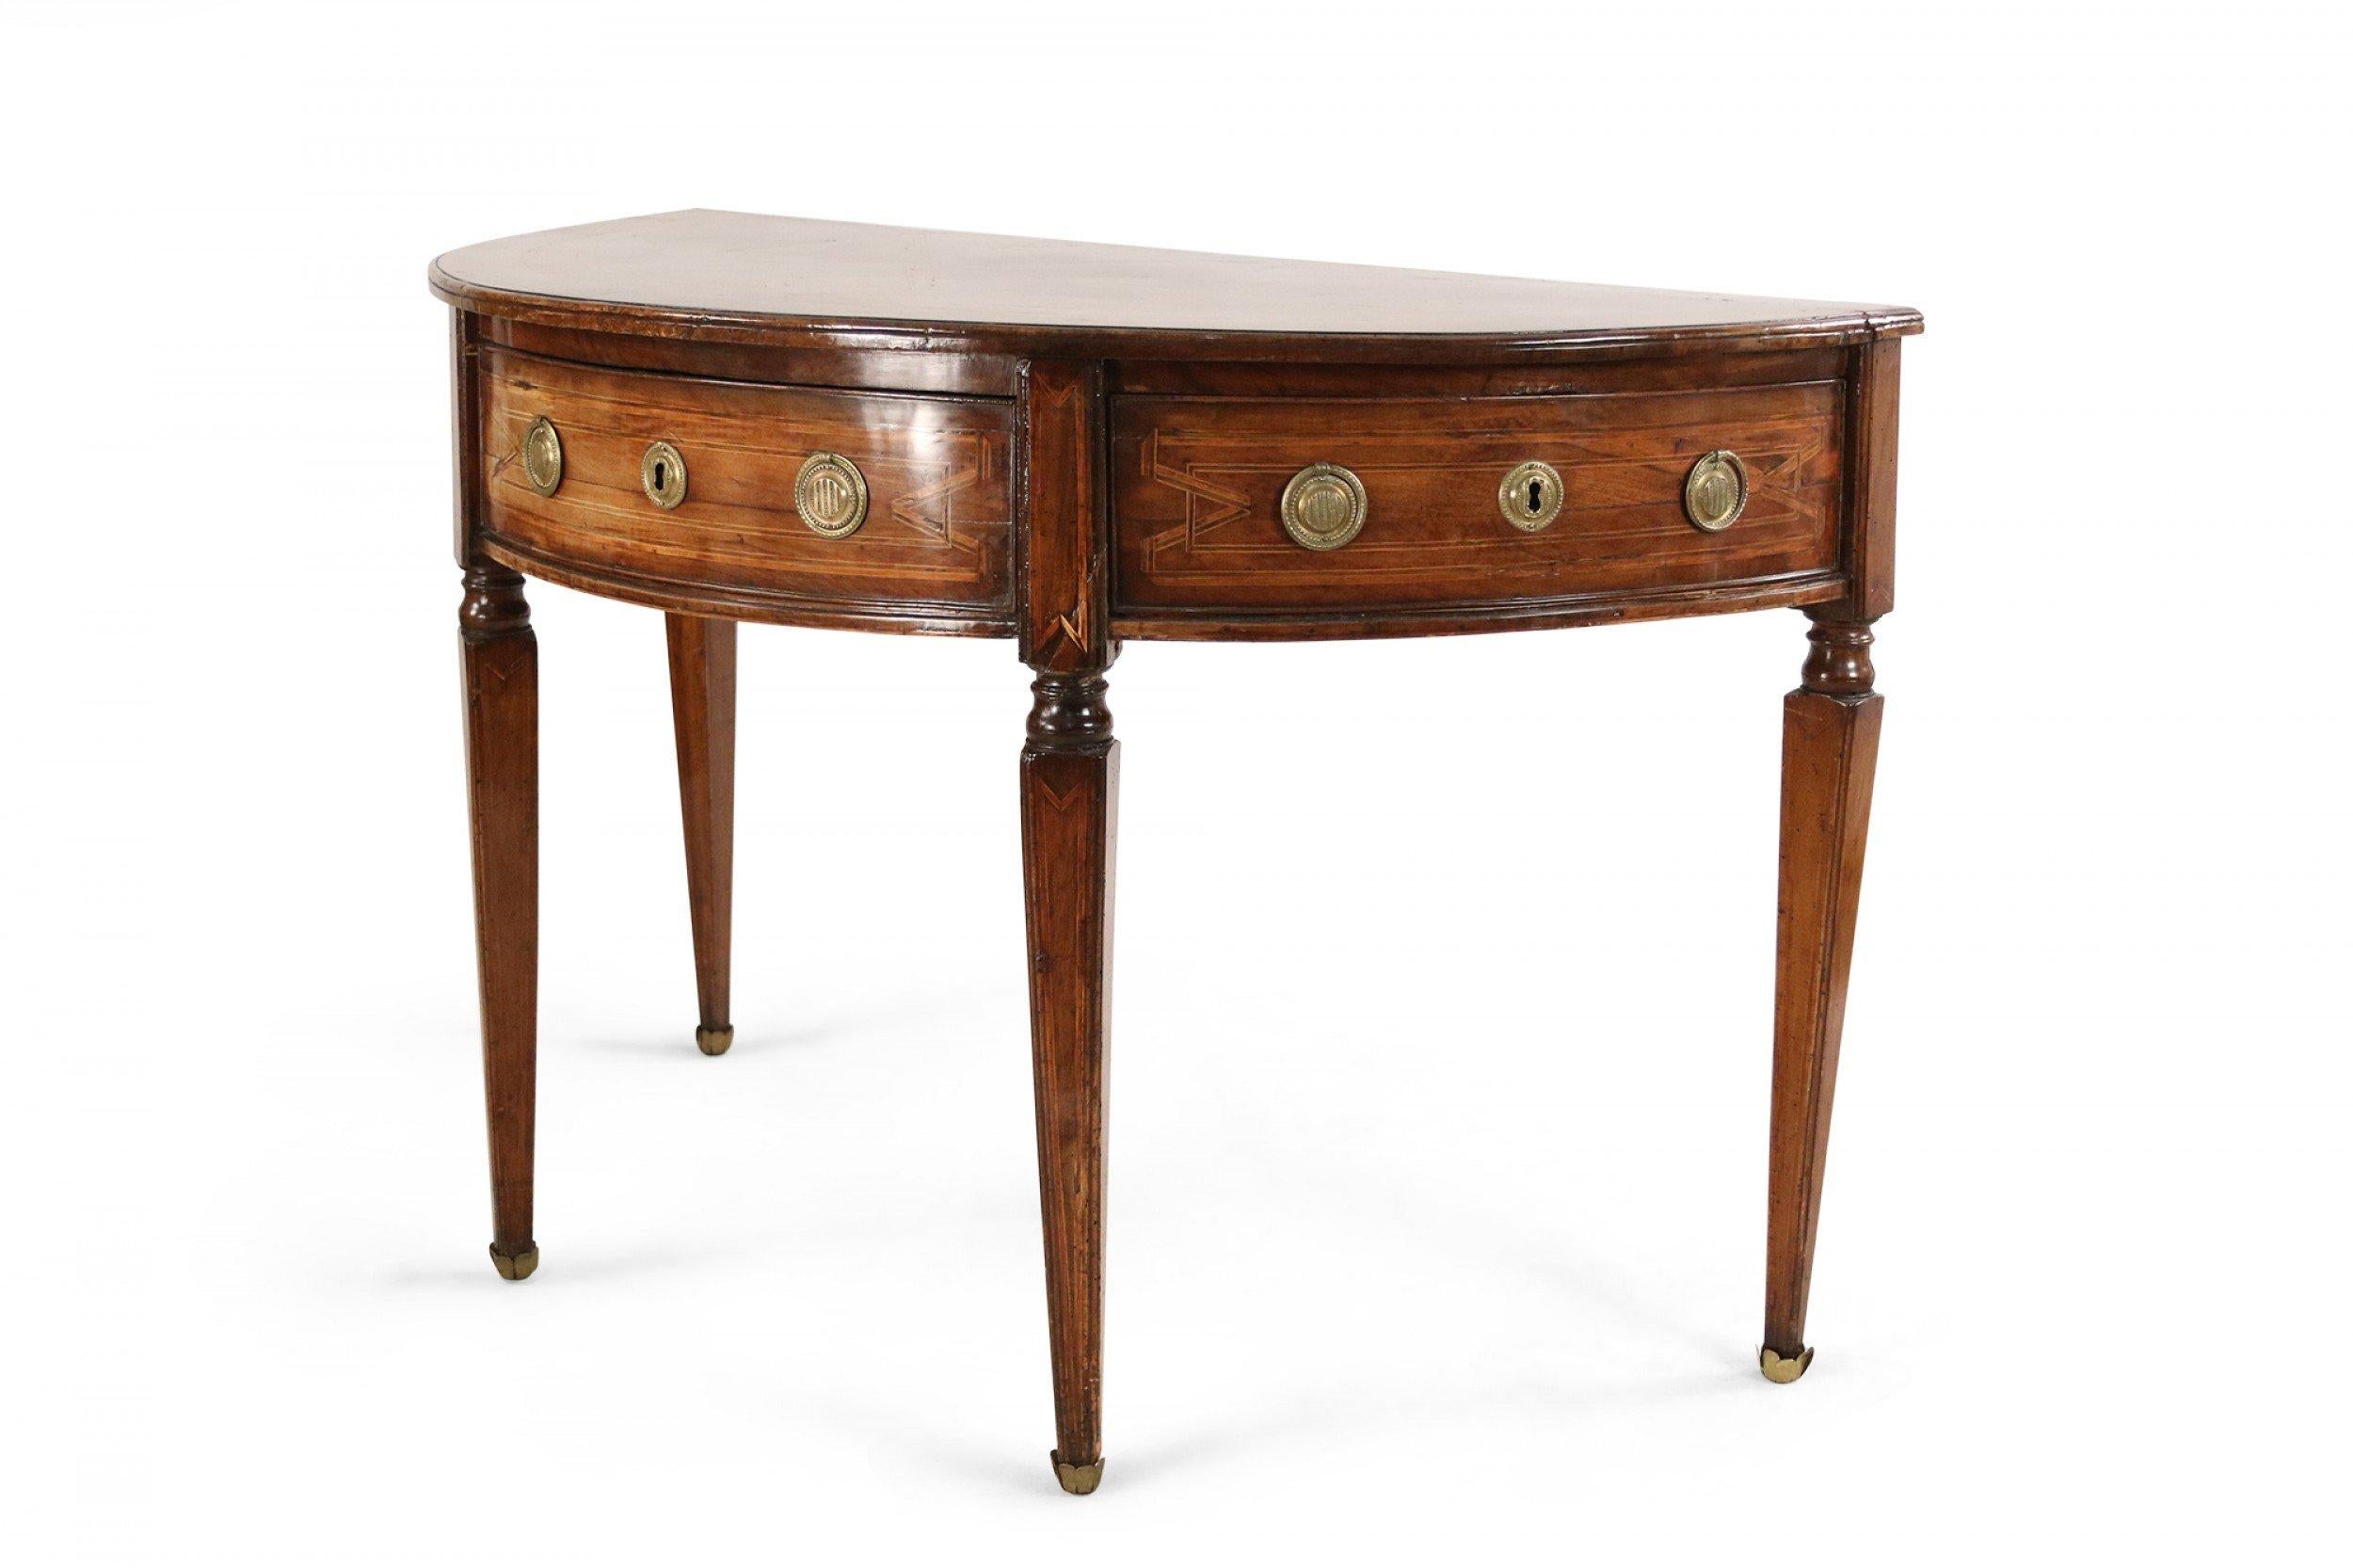 Pair of English Sheraton 18th century demilune shaped oak console tables with an inlaid compass patterned top and on 3 drawers with brass circular drawer pulls resting a square tapered legs.